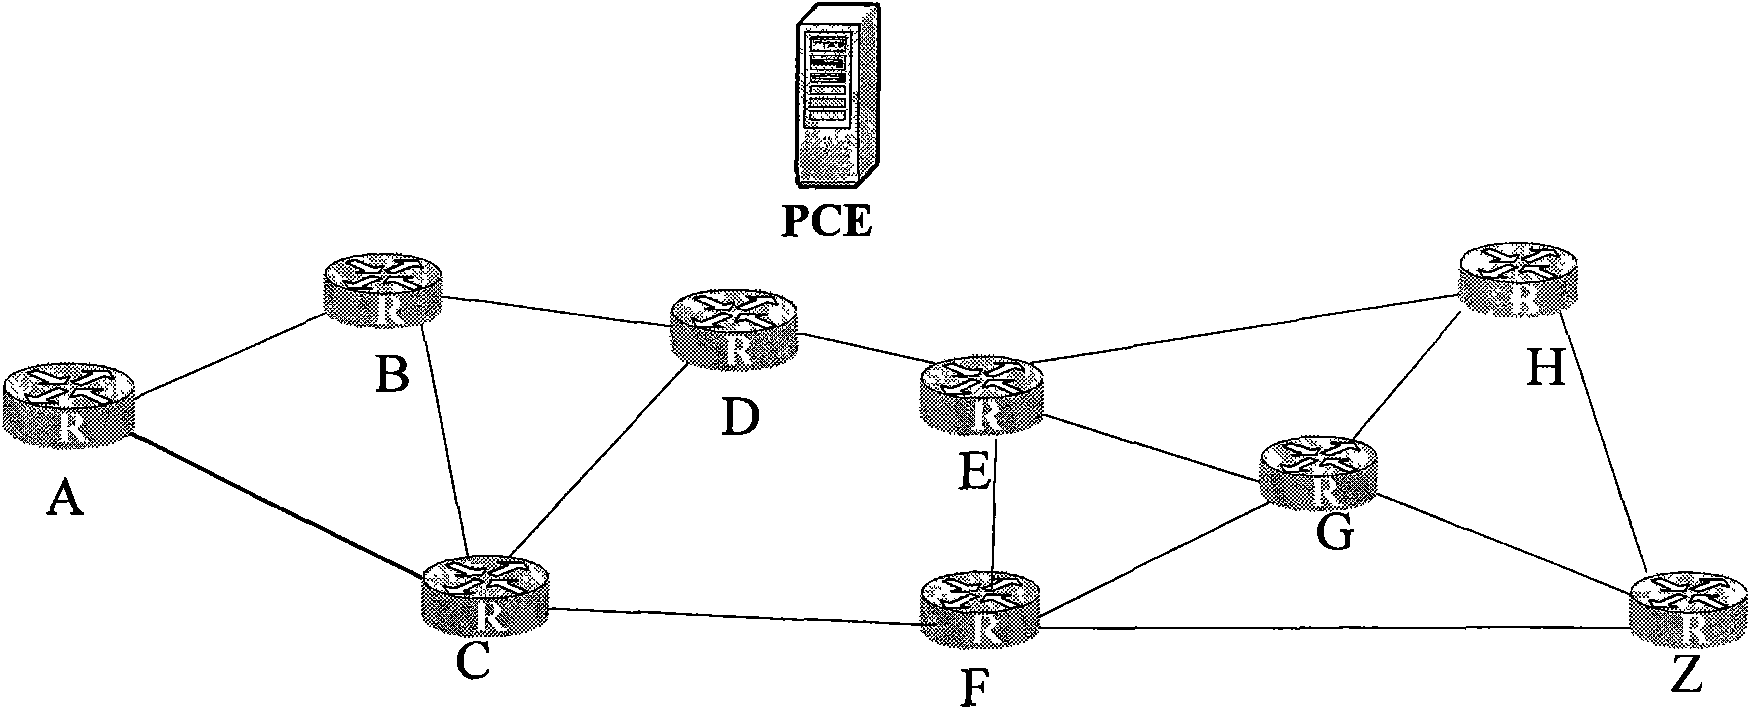 Method and system for protecting path based on PCE (Patch Computation Element)